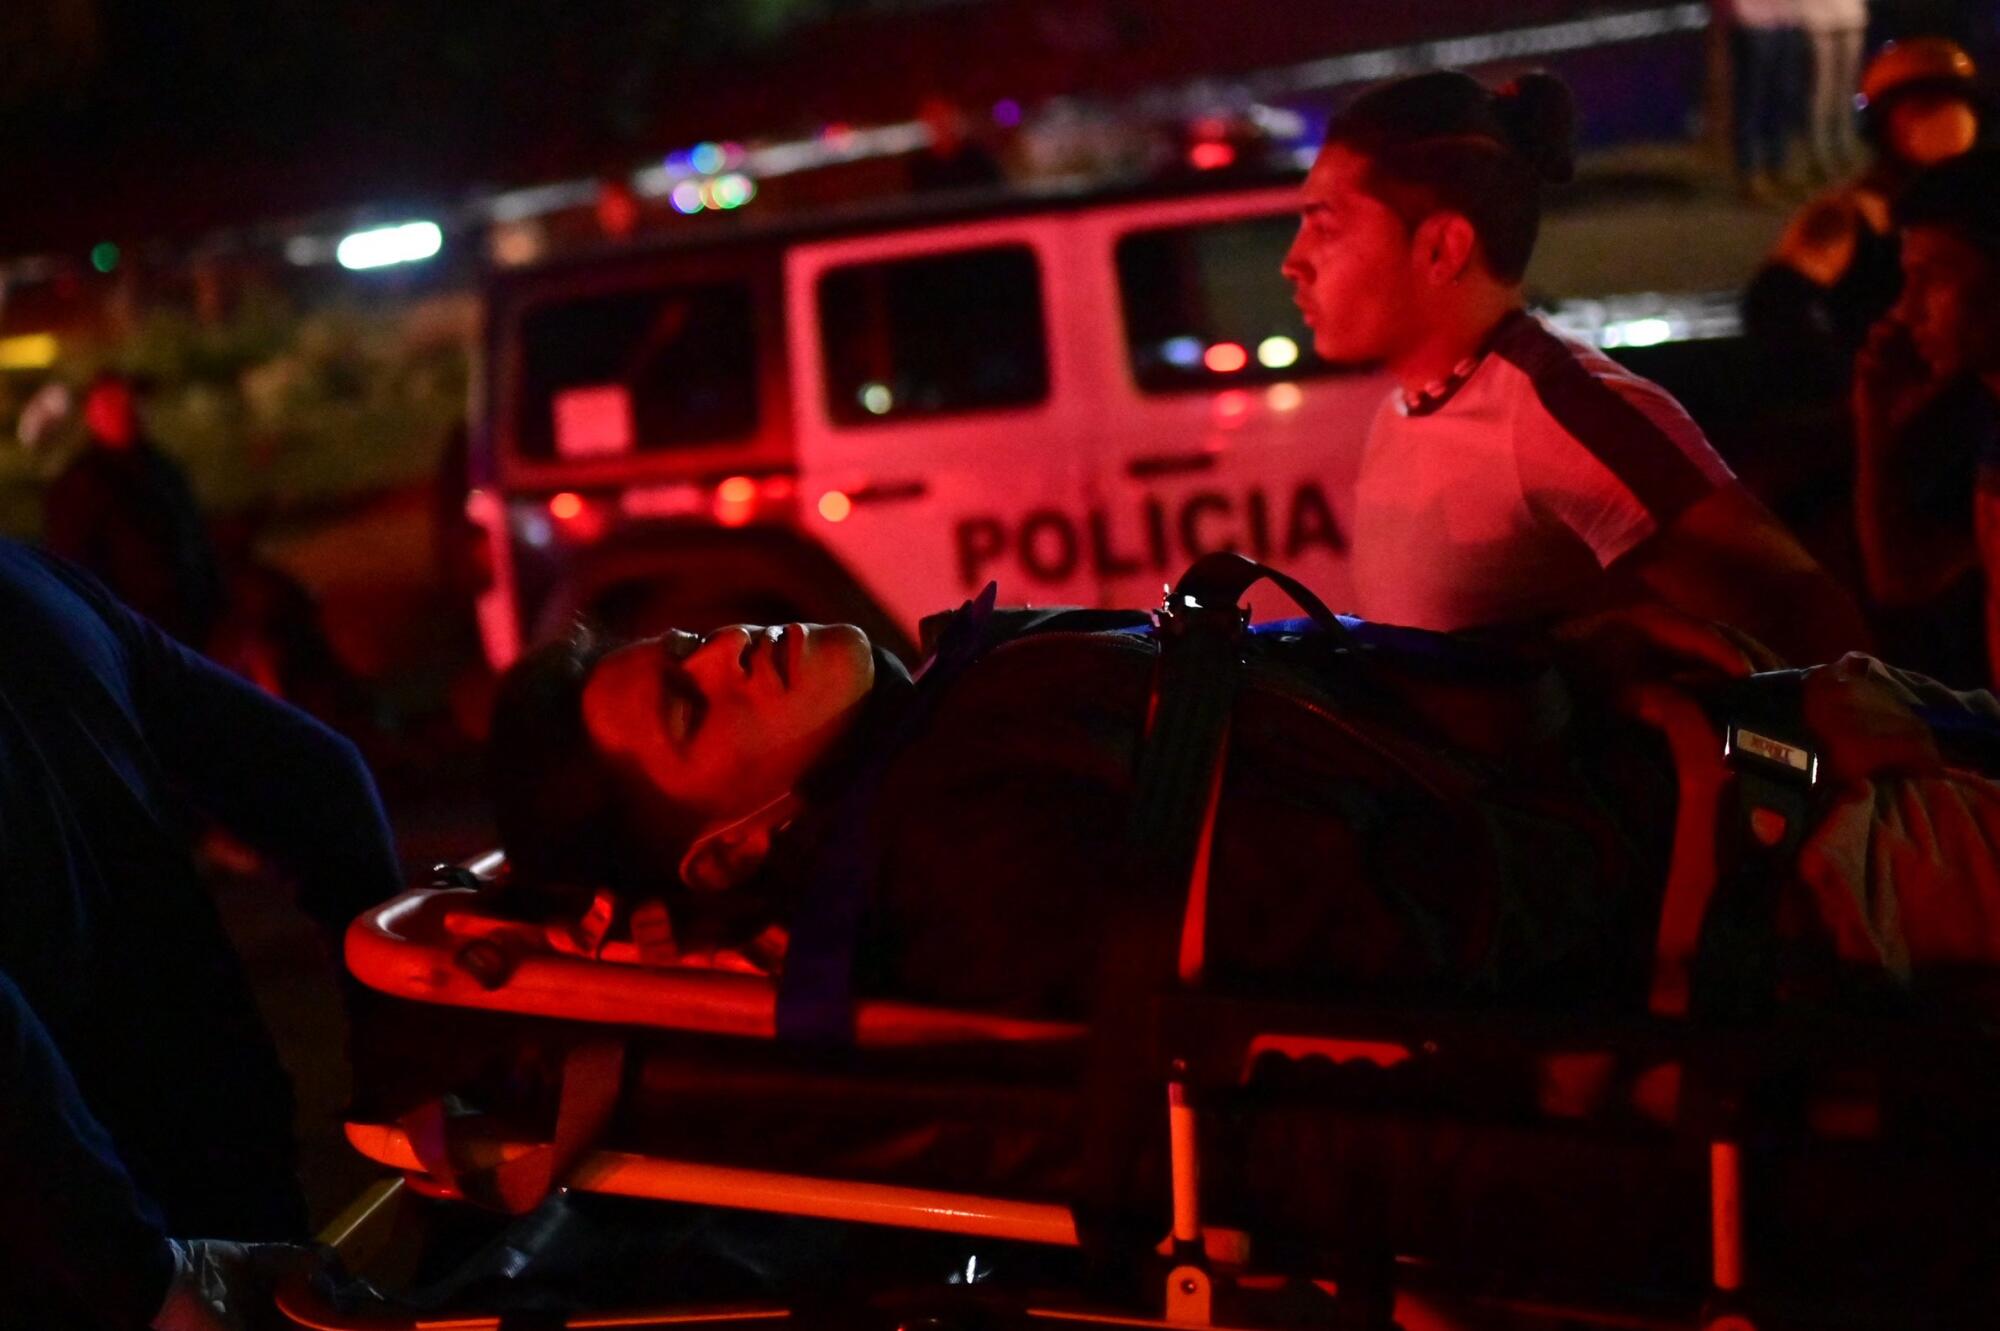 An injured person on a stretcher bathed in red light at night.